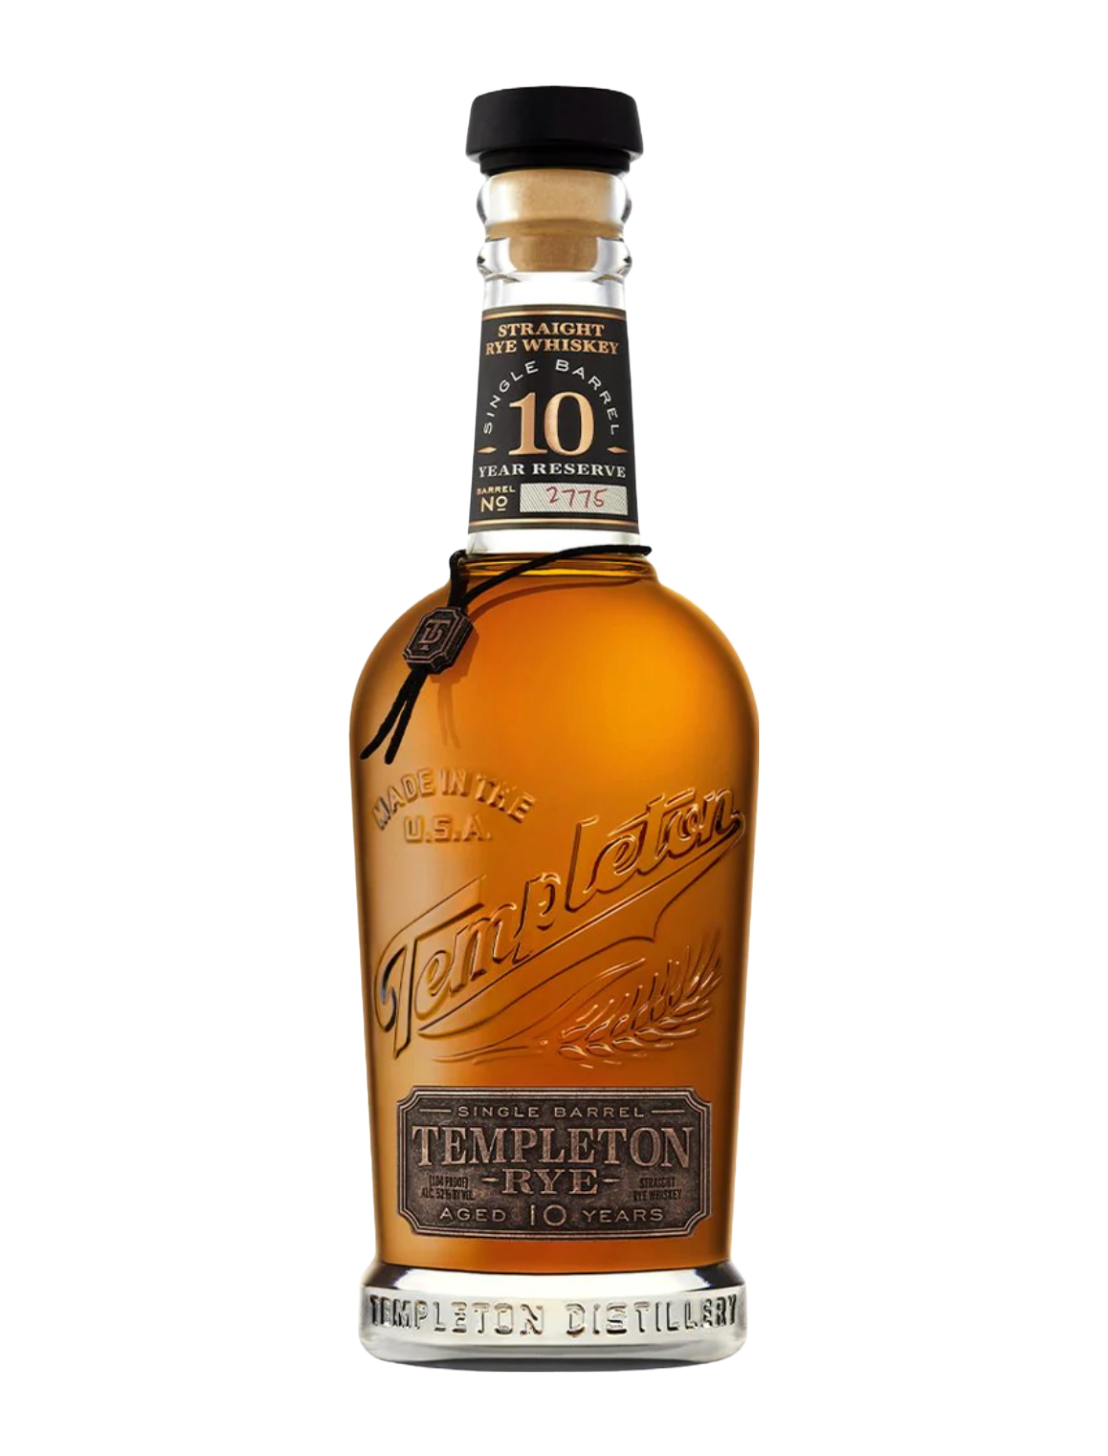 An elegant bottle of Templeton 10 Year Rye Whiskey in front of a plain white background